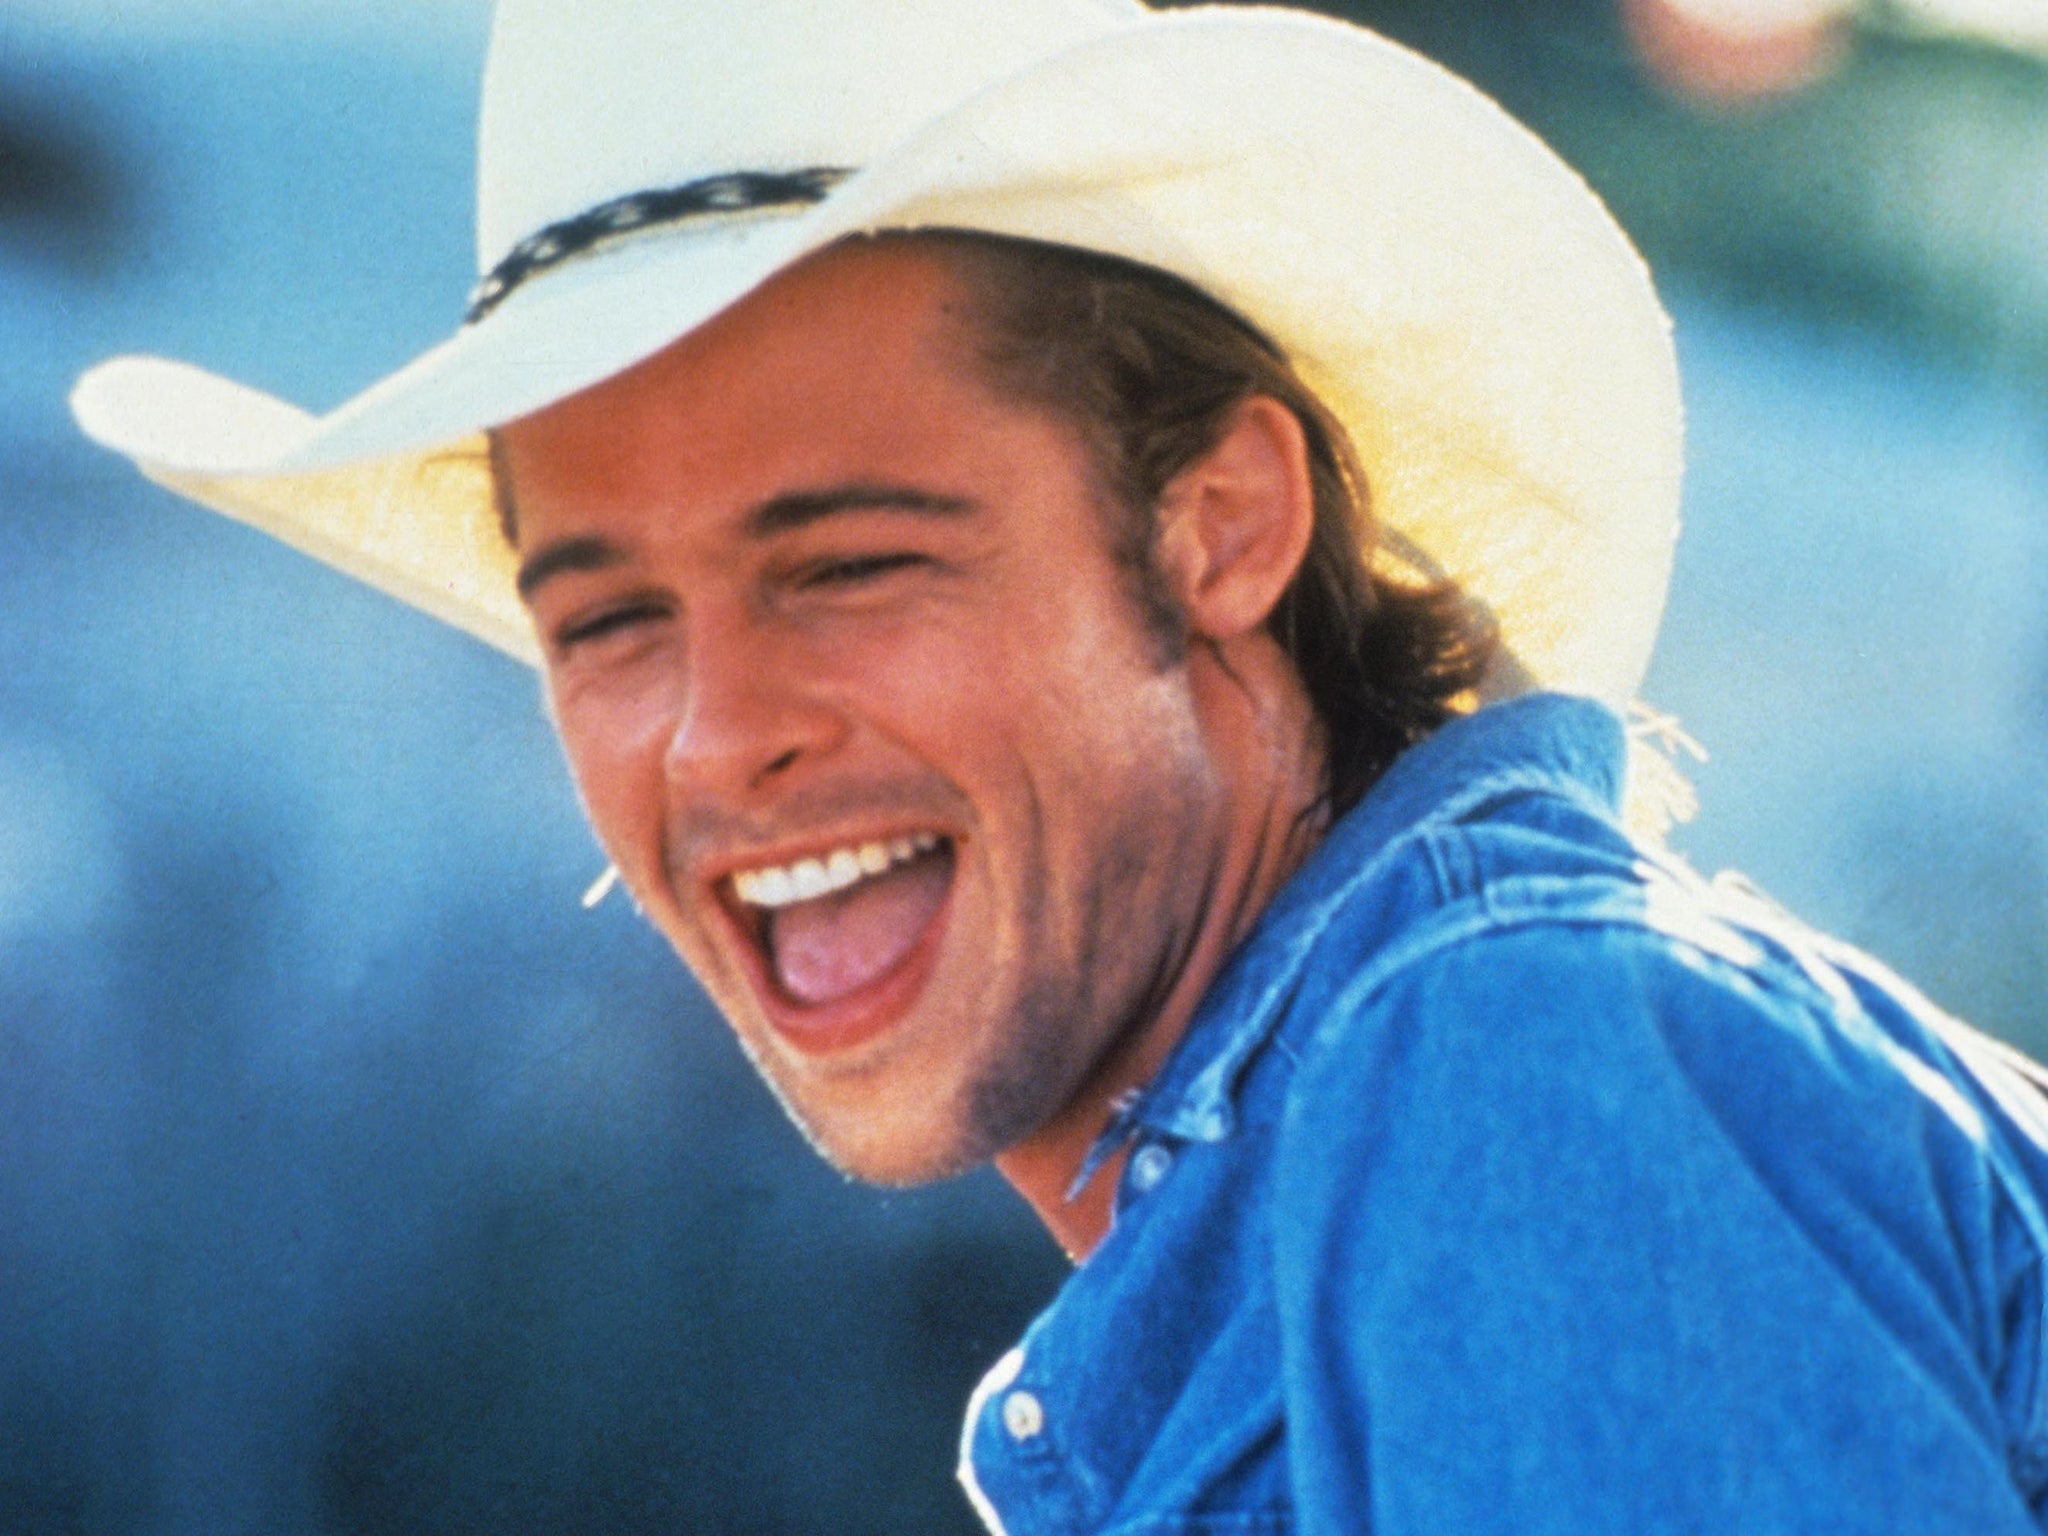 Brad Pitt: Hollywood heartthrob to talented character actor